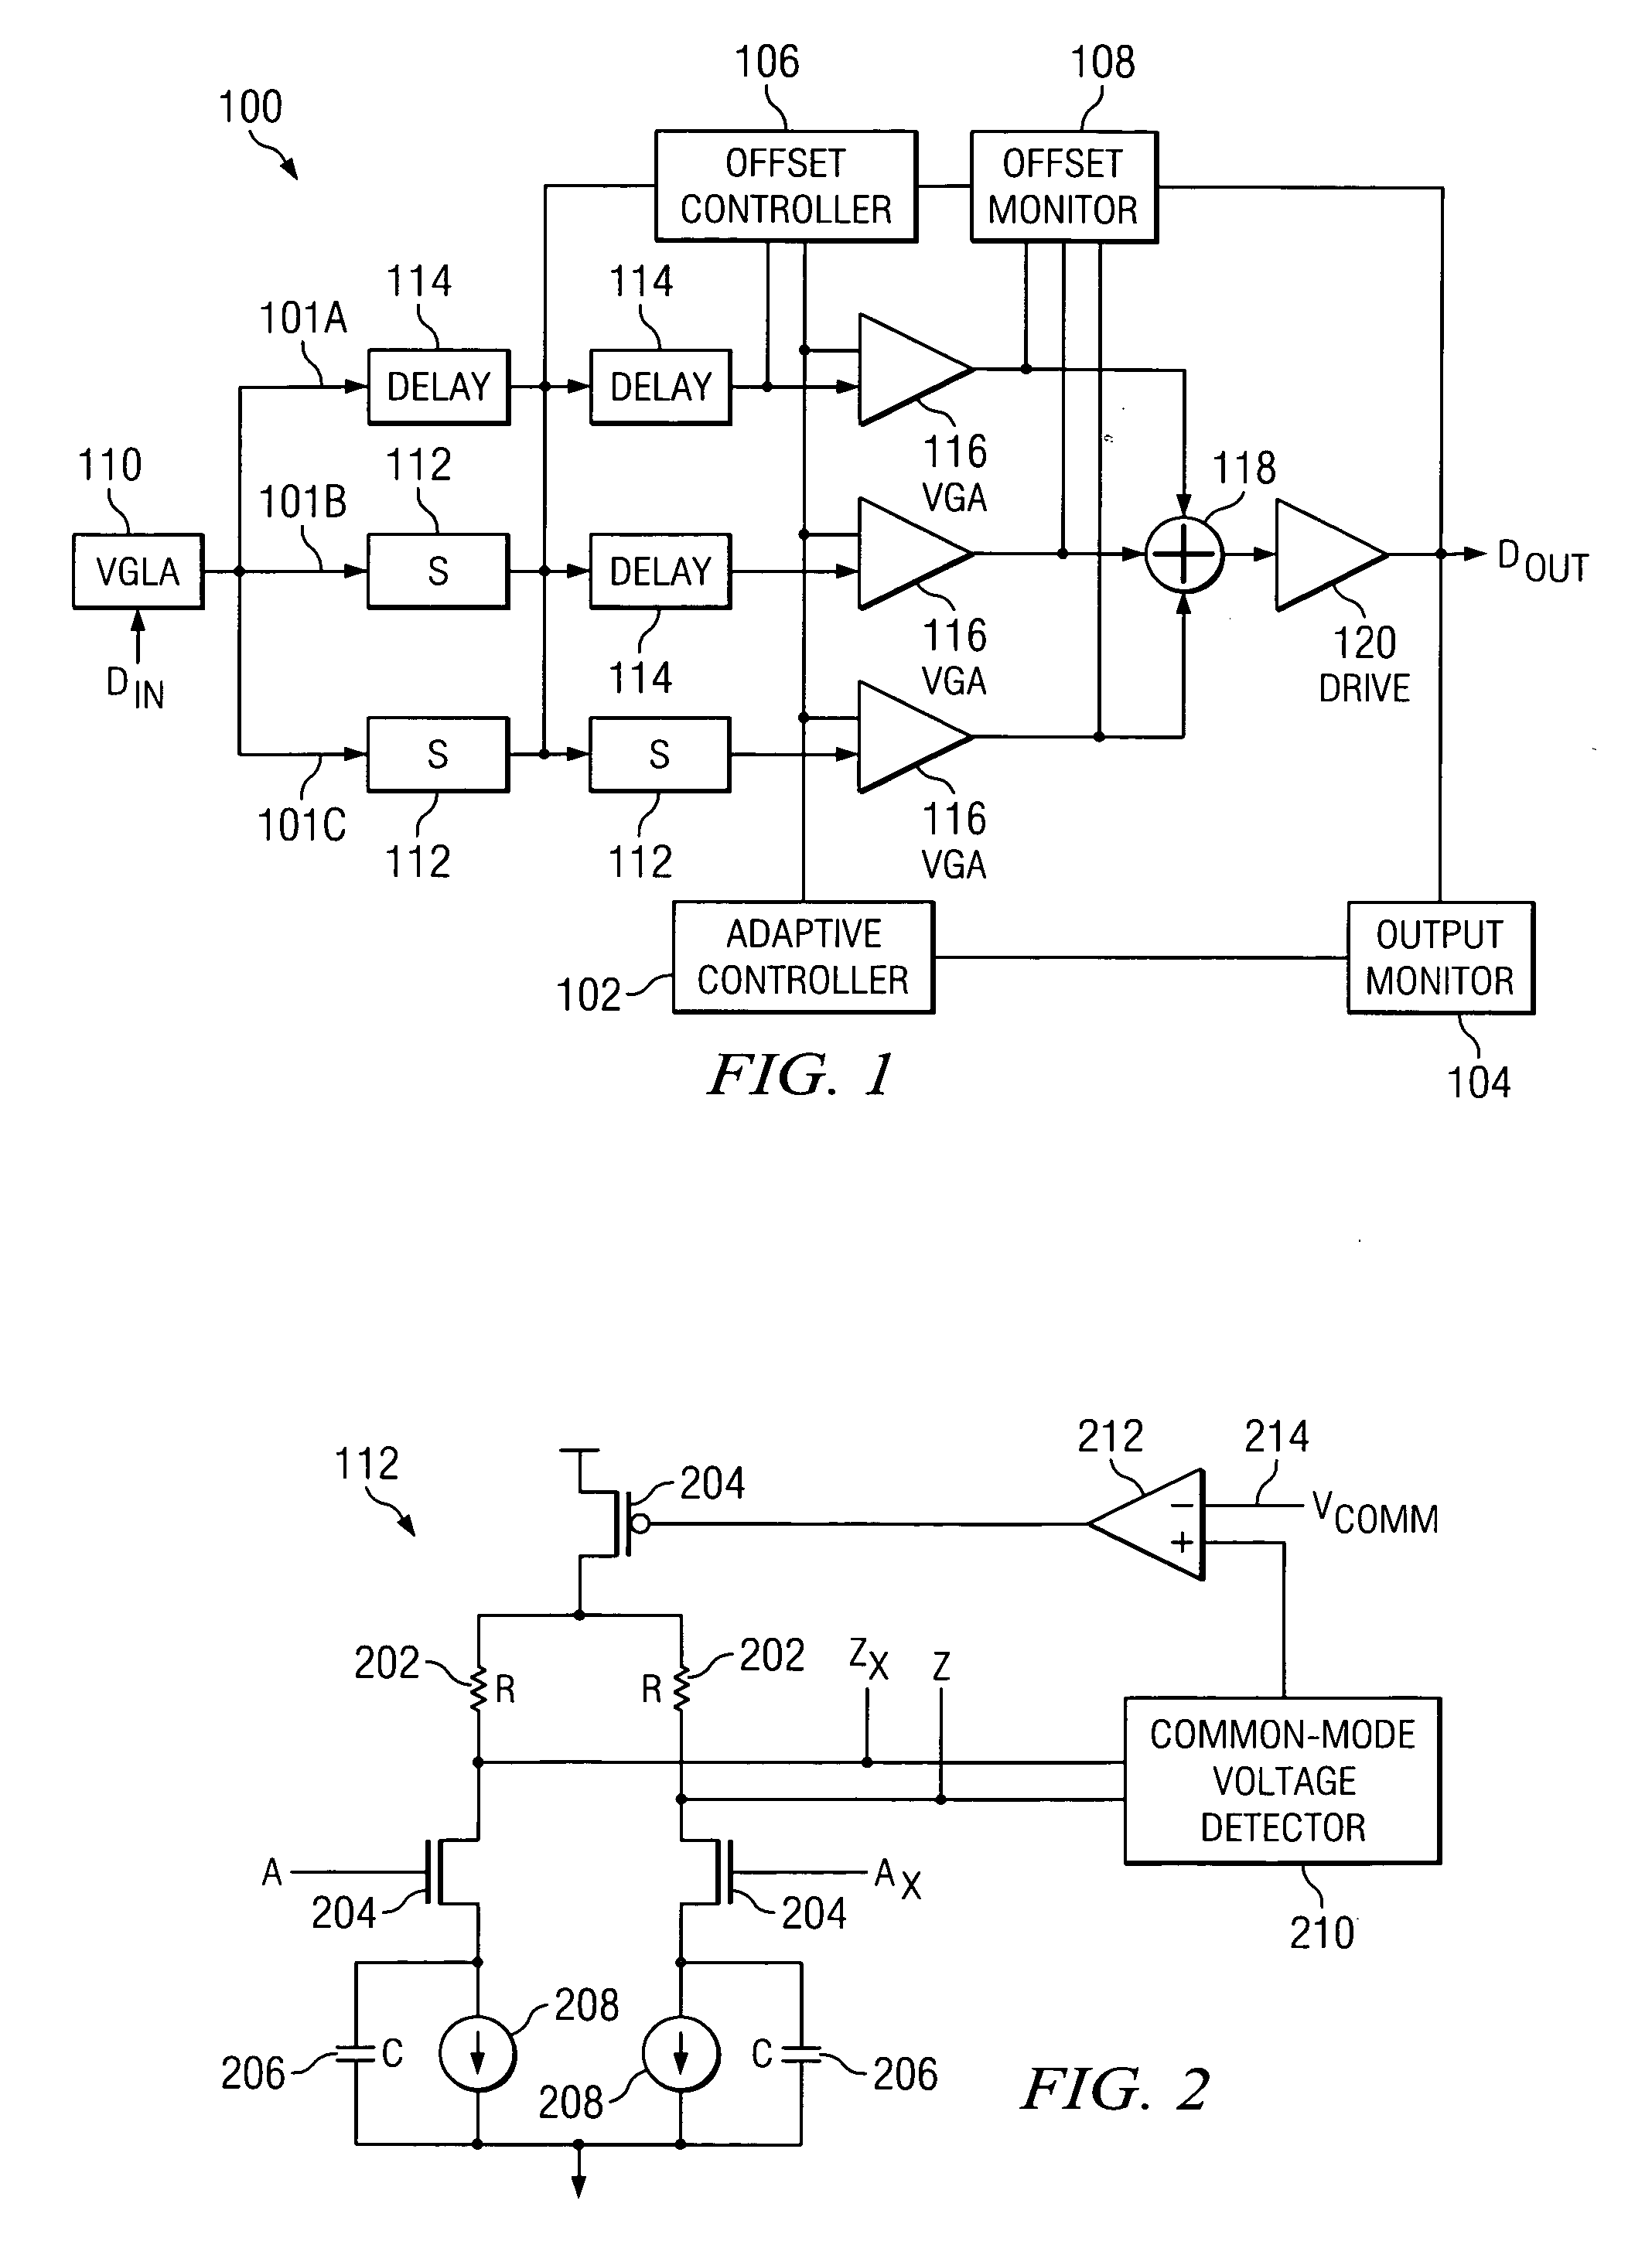 Adaptive equalizer with DC offset compensation